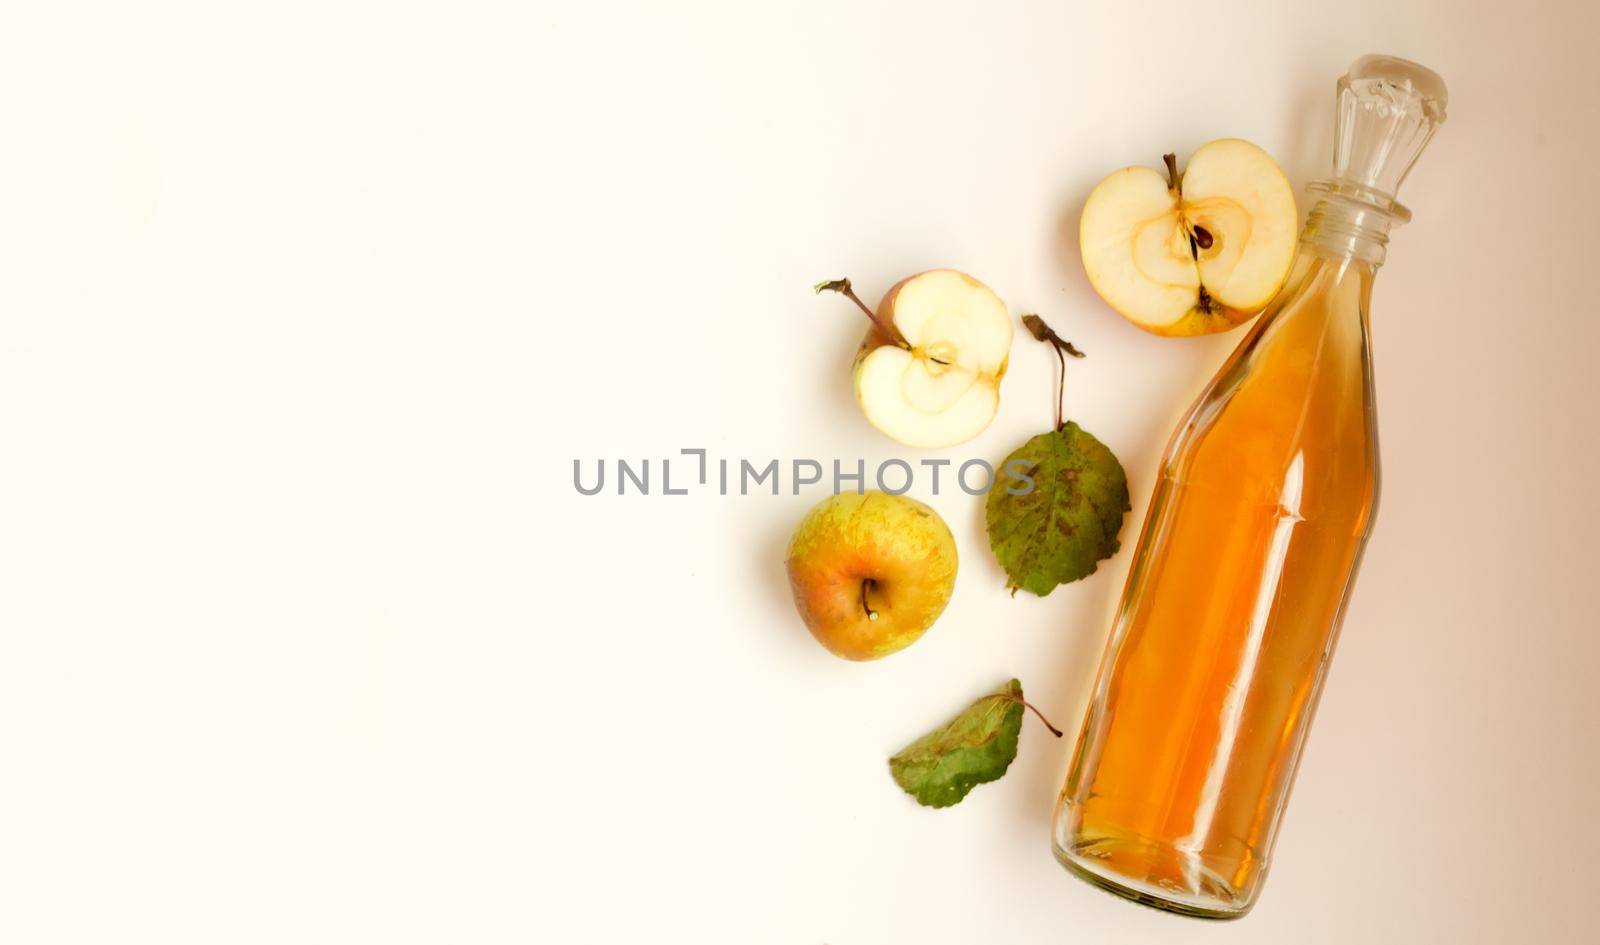 A bottle of apple cider vinegar and apple fruit composition with leaves on white background. copyspace.